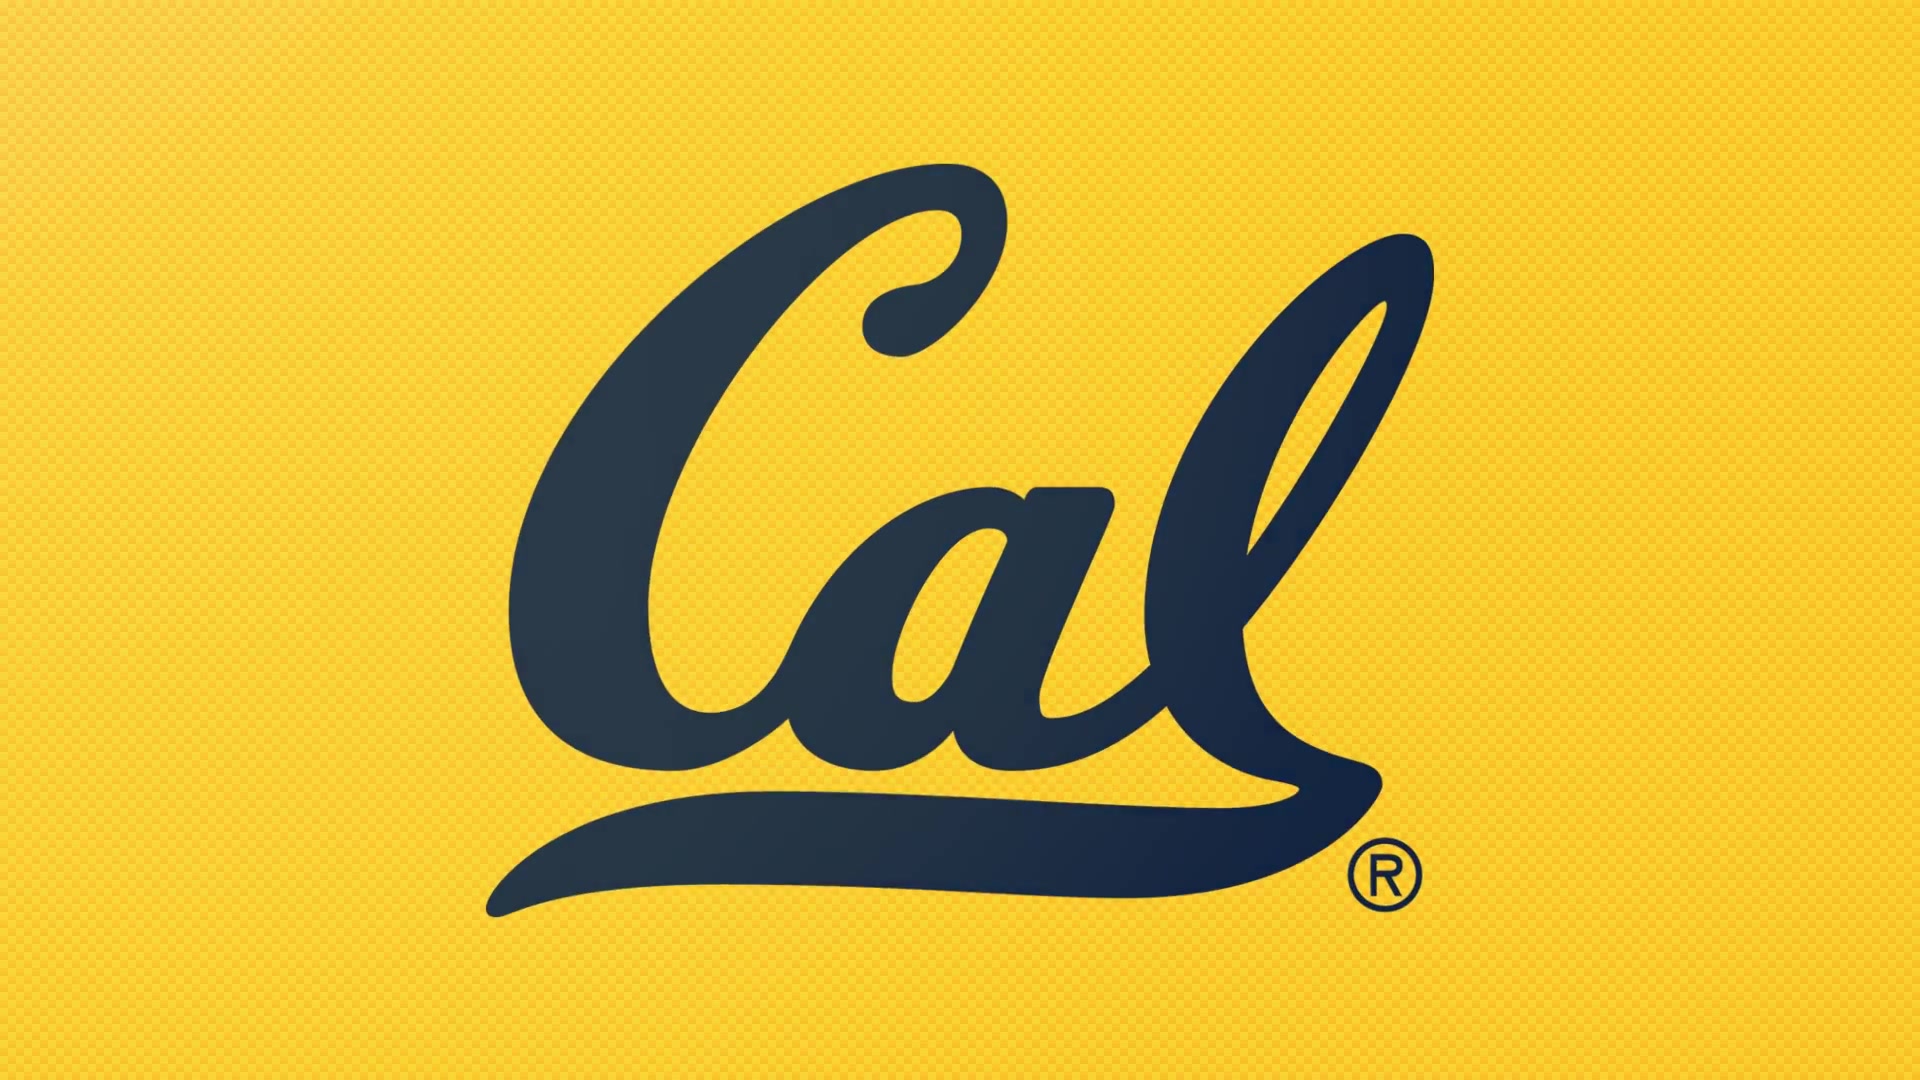 Cal Football: Getting to Know "Luc Bequette"